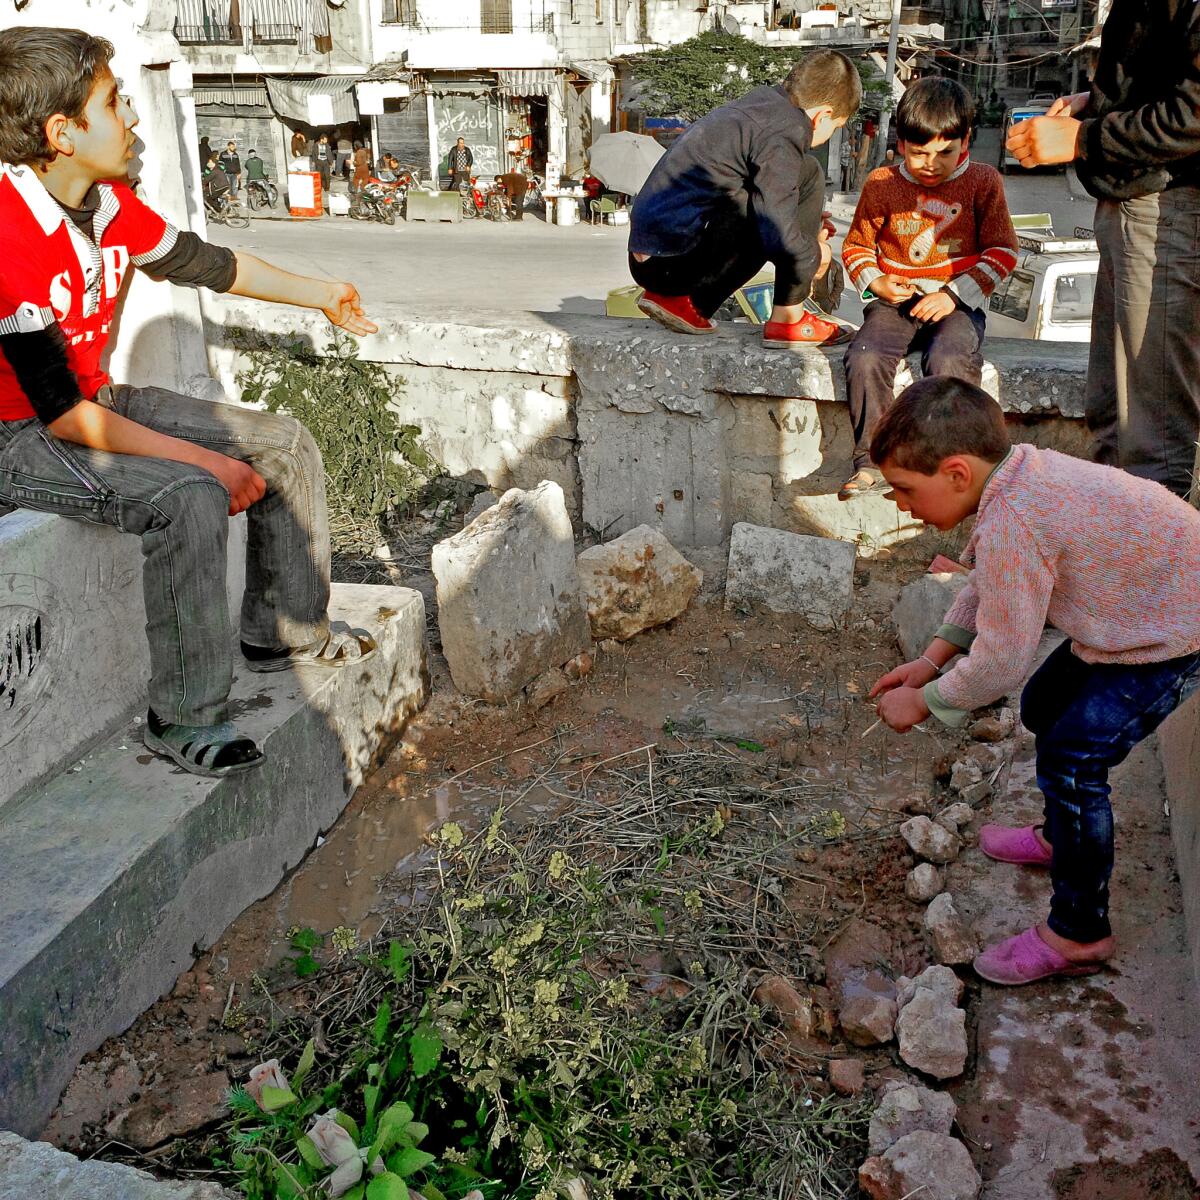 Children water their father's grave in hopes of getting more of the yellow flowers to bloom there.